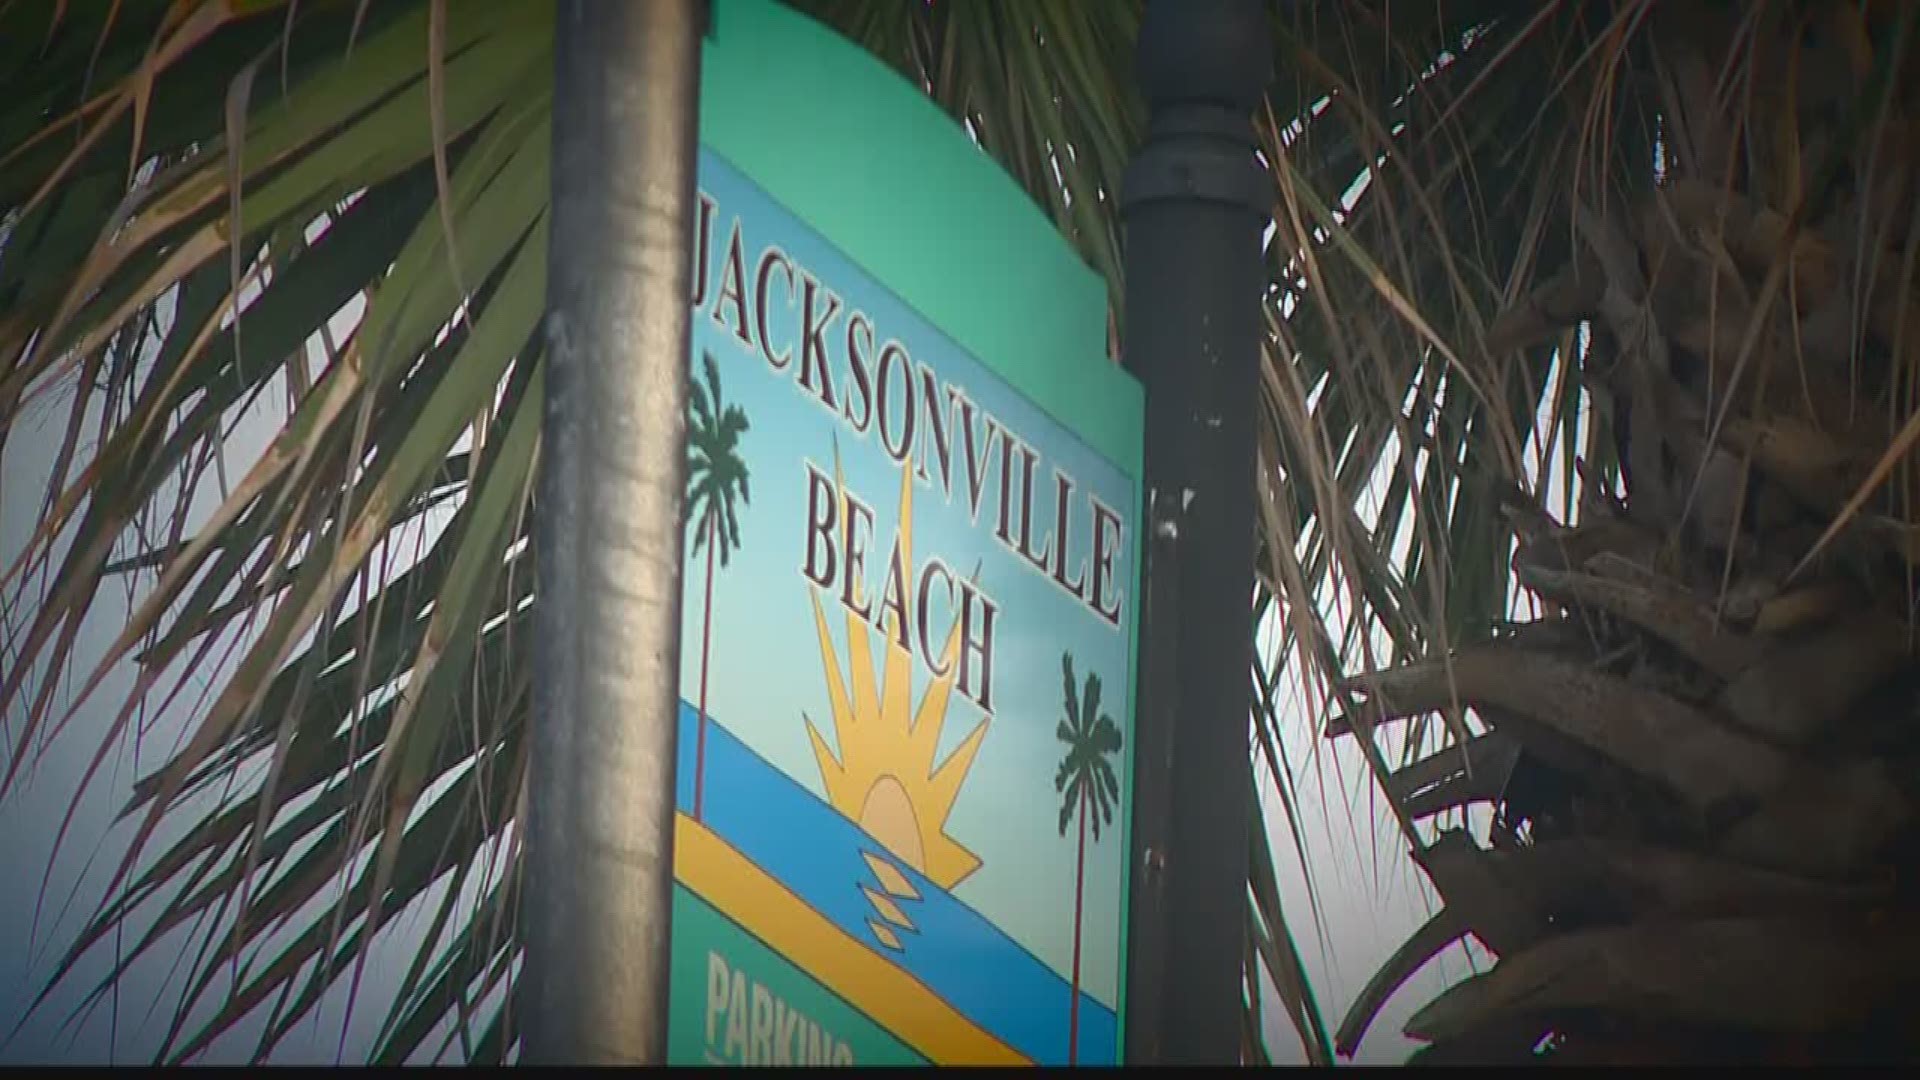 On weekends, holidays and festivities, parking will cost double at Jacksonville Beach: From $5 to $10.